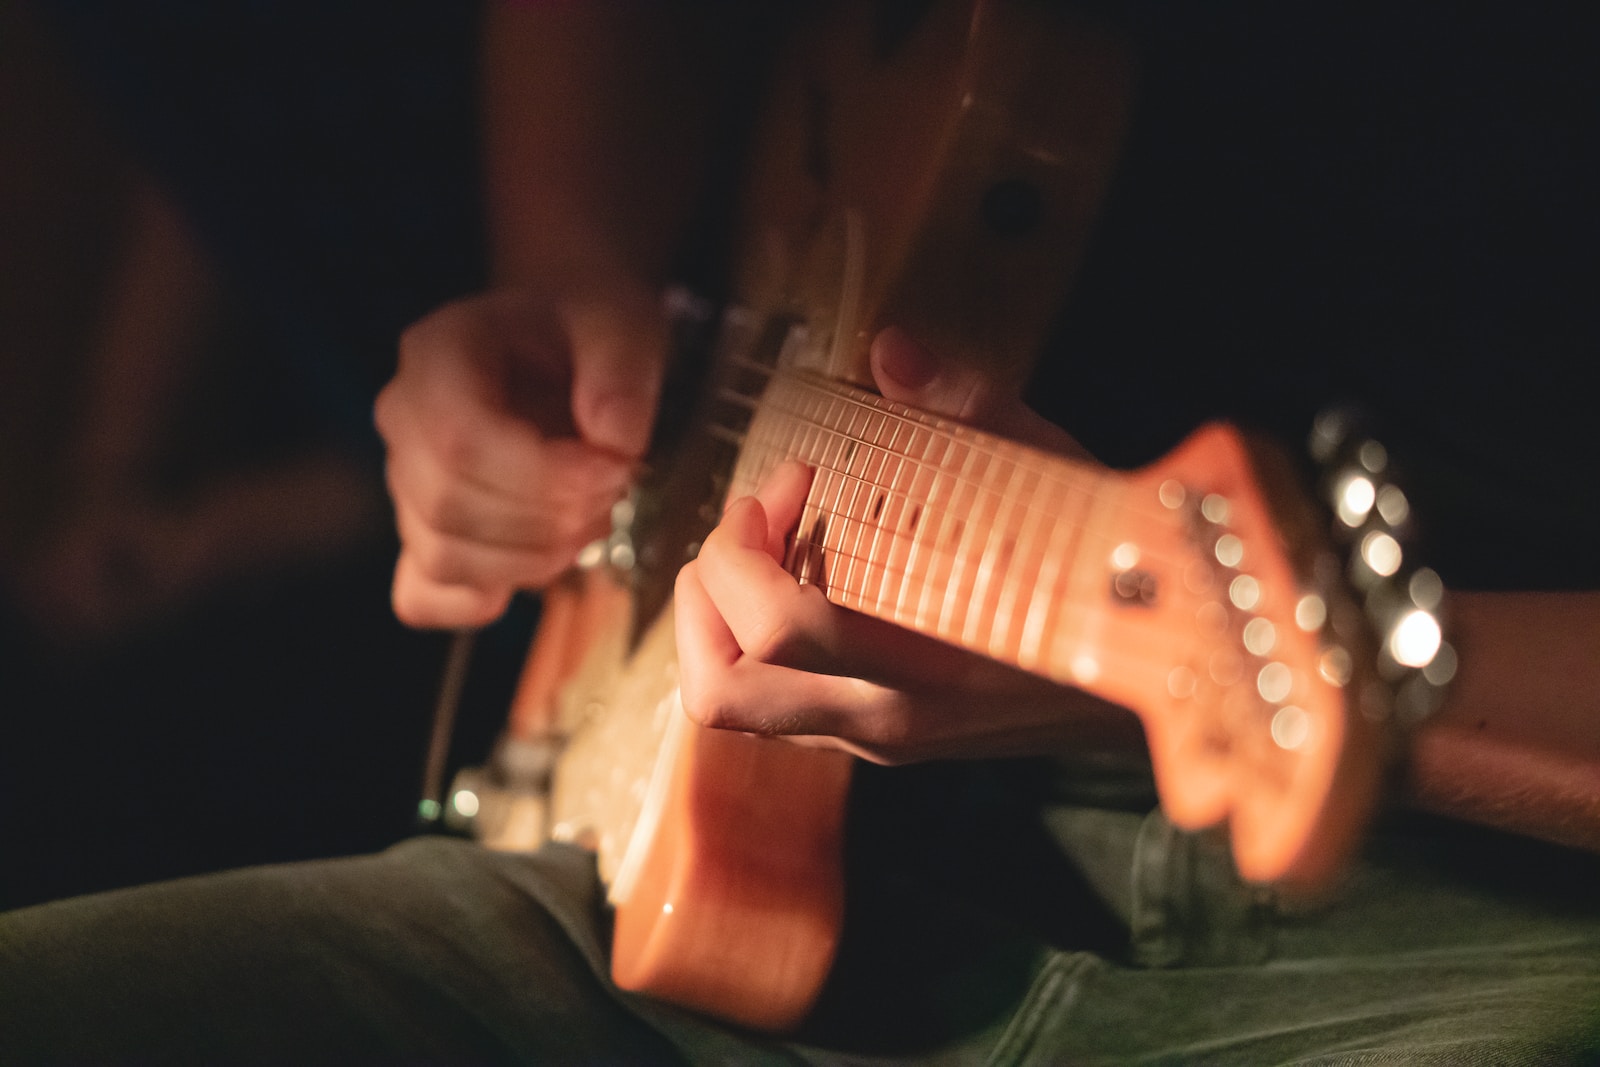 a close up of a person playing a guitar